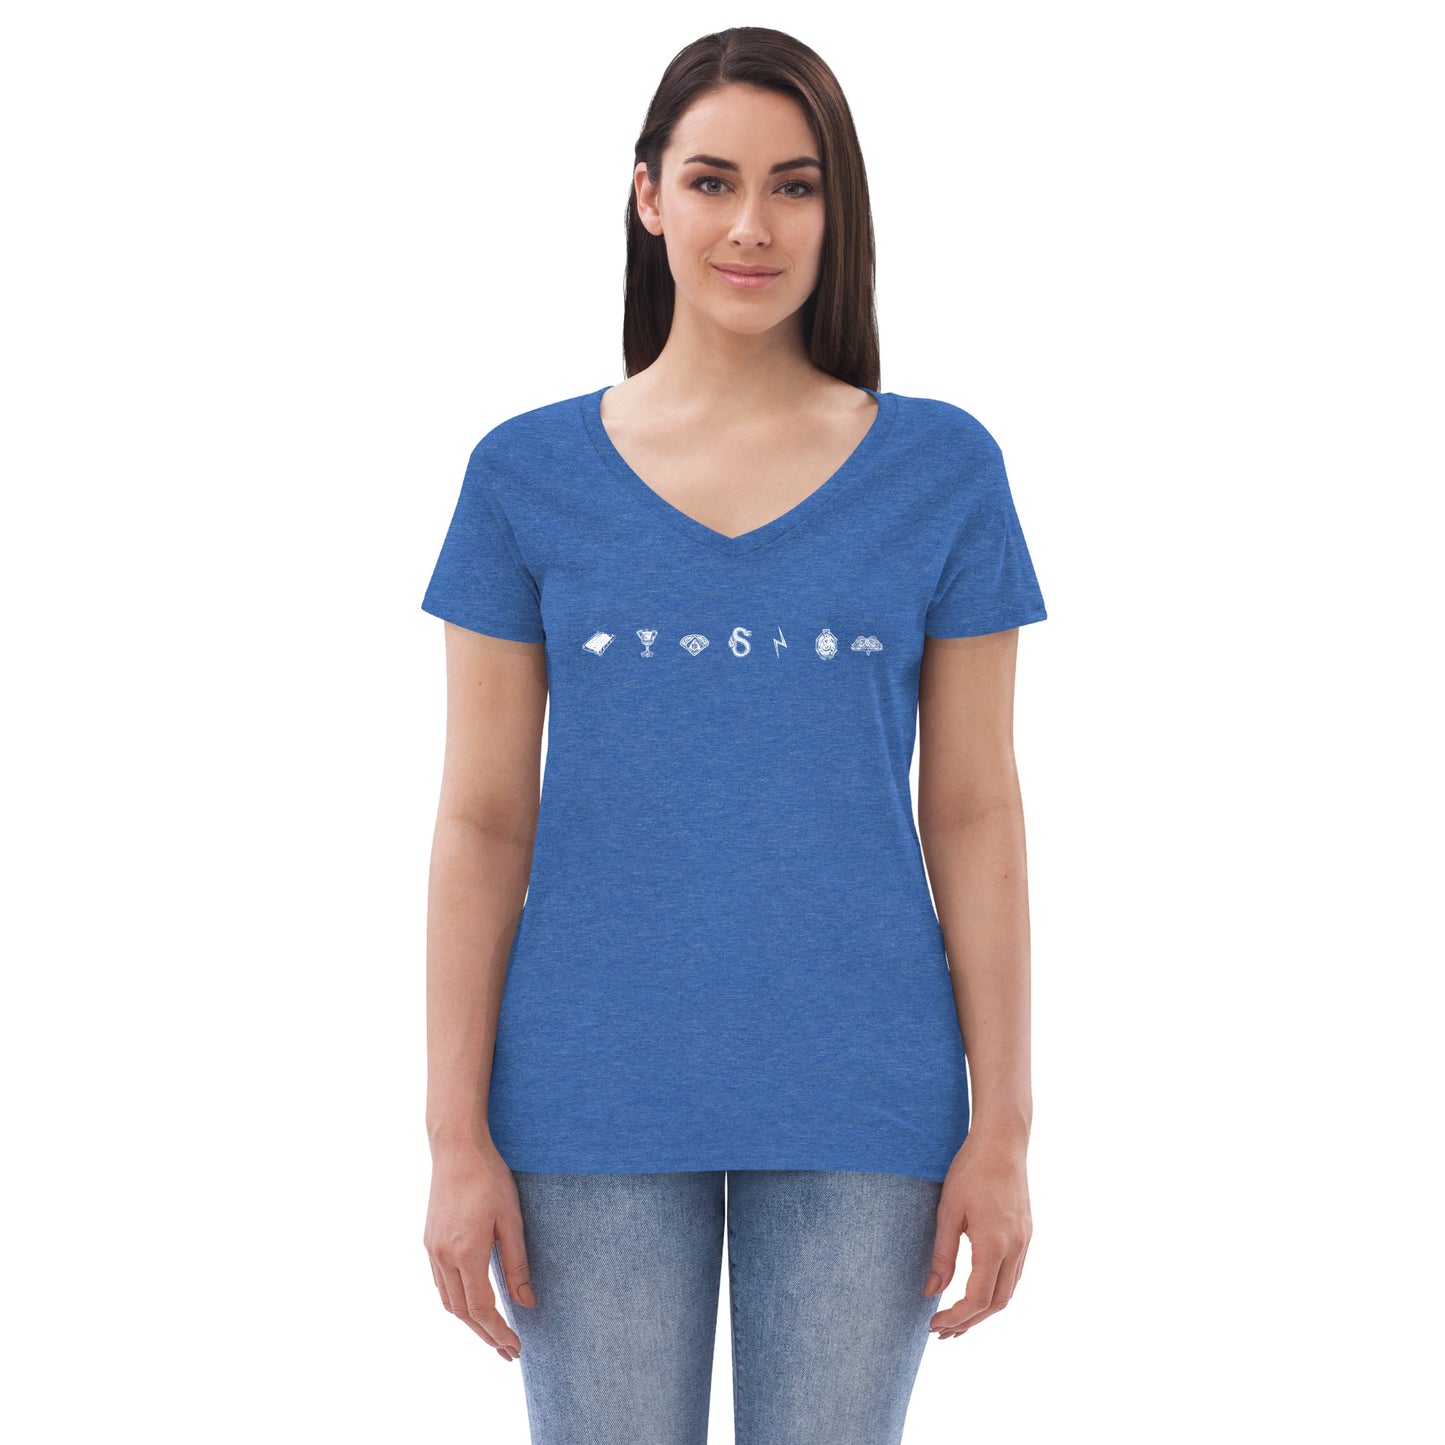 "Horcrux" V-Neck T-Shirt (from Harry Potter and the Half-Blood Prince™ in Concert)